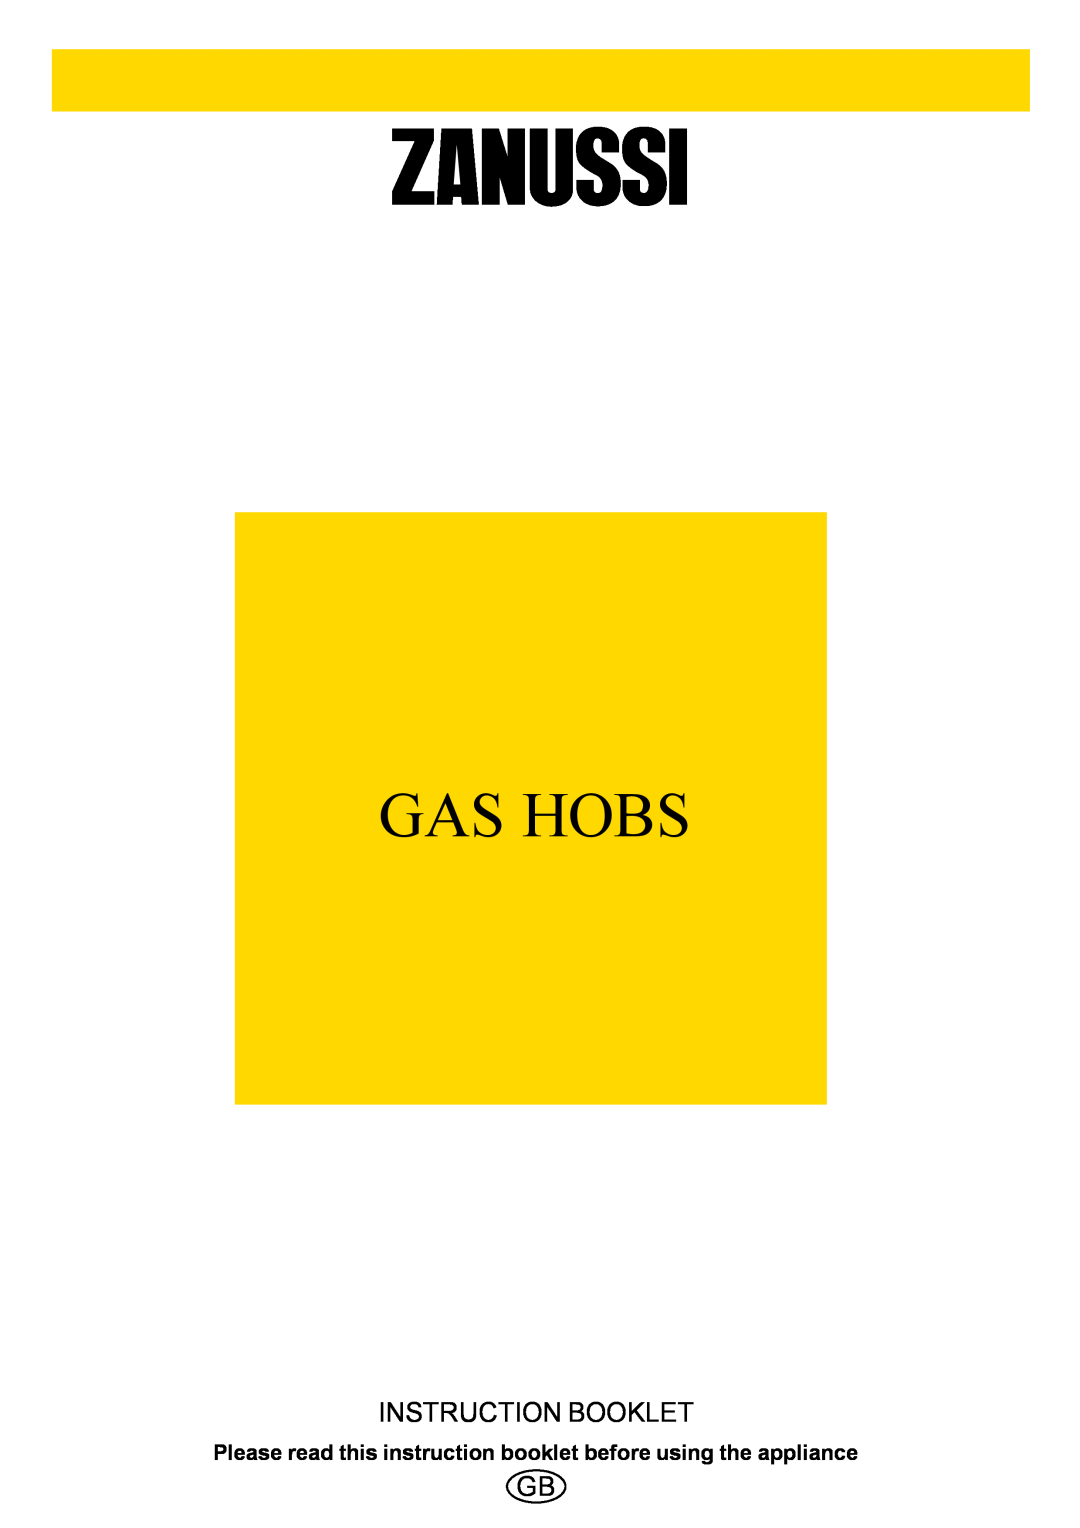 Zanussi GAS HOB manual Please read this instruction booklet before using the appliance, Gas Hobs, Instruction Booklet 